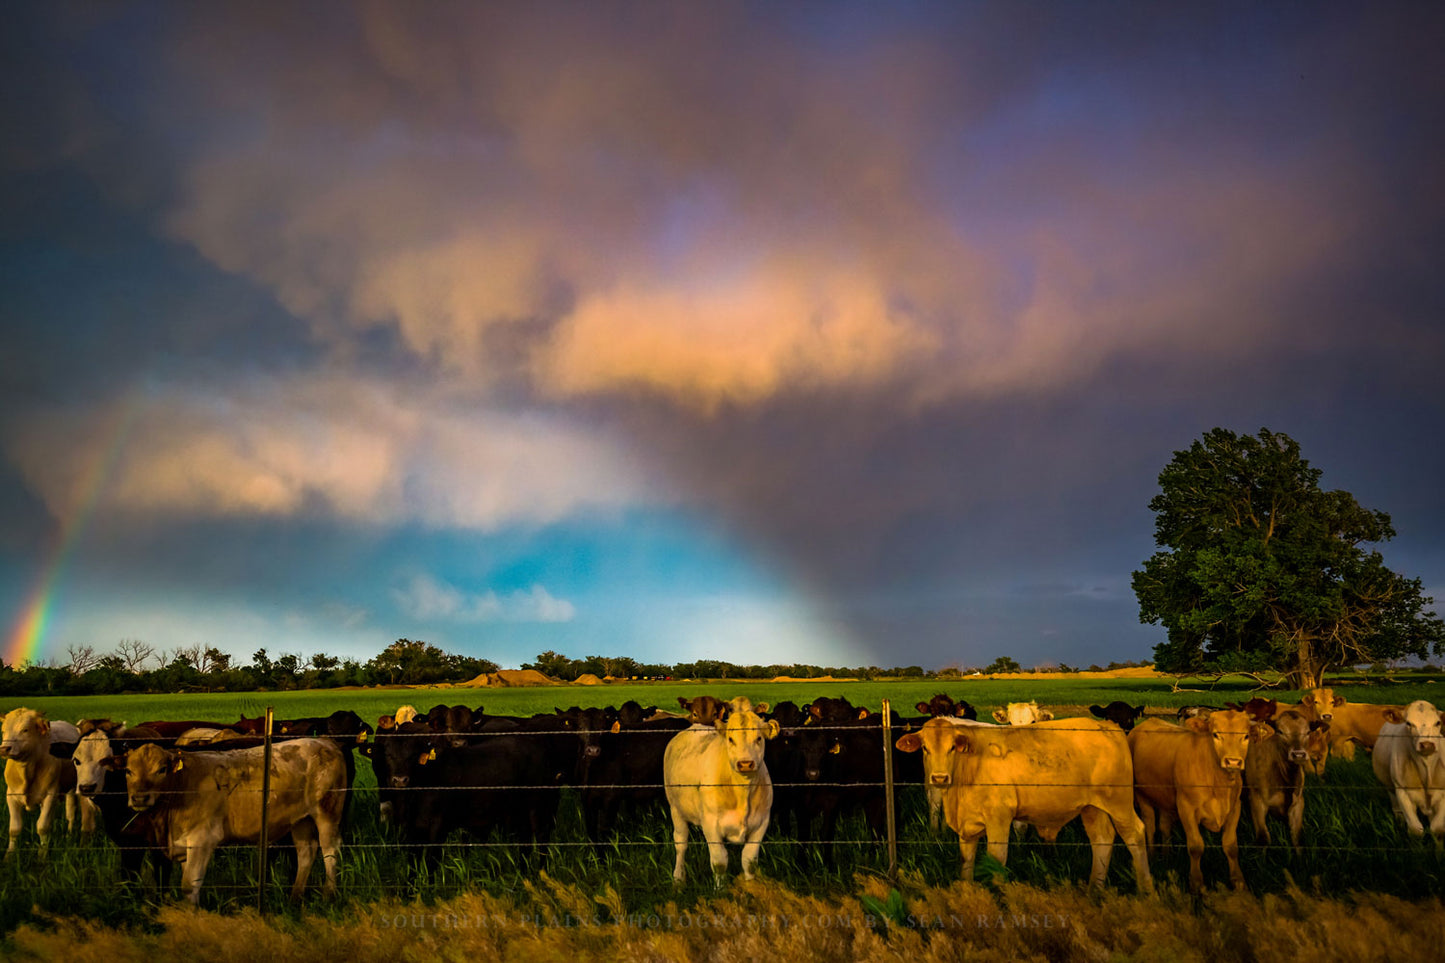 Country photography print of cows gathering along a barbed wire fence as sunlight breaks through storm clouds on a stormy spring evening in Kansas by Sean Ramsey of Southern Plains Photography.